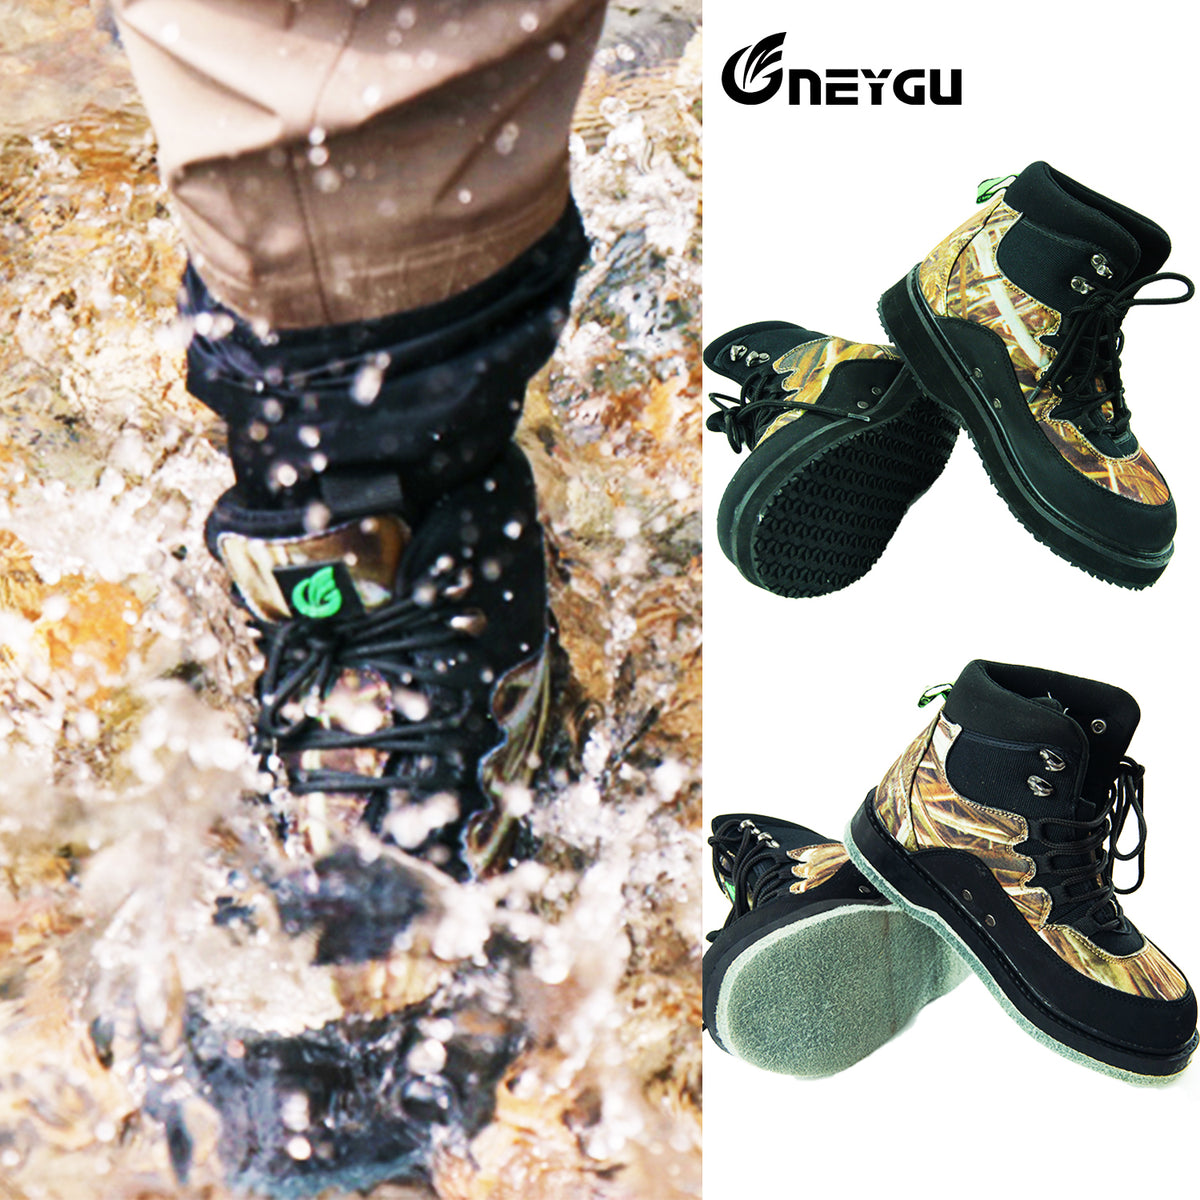 Promotional NeyGu Men's Fishing Wading Shoes, Breathable Boots for